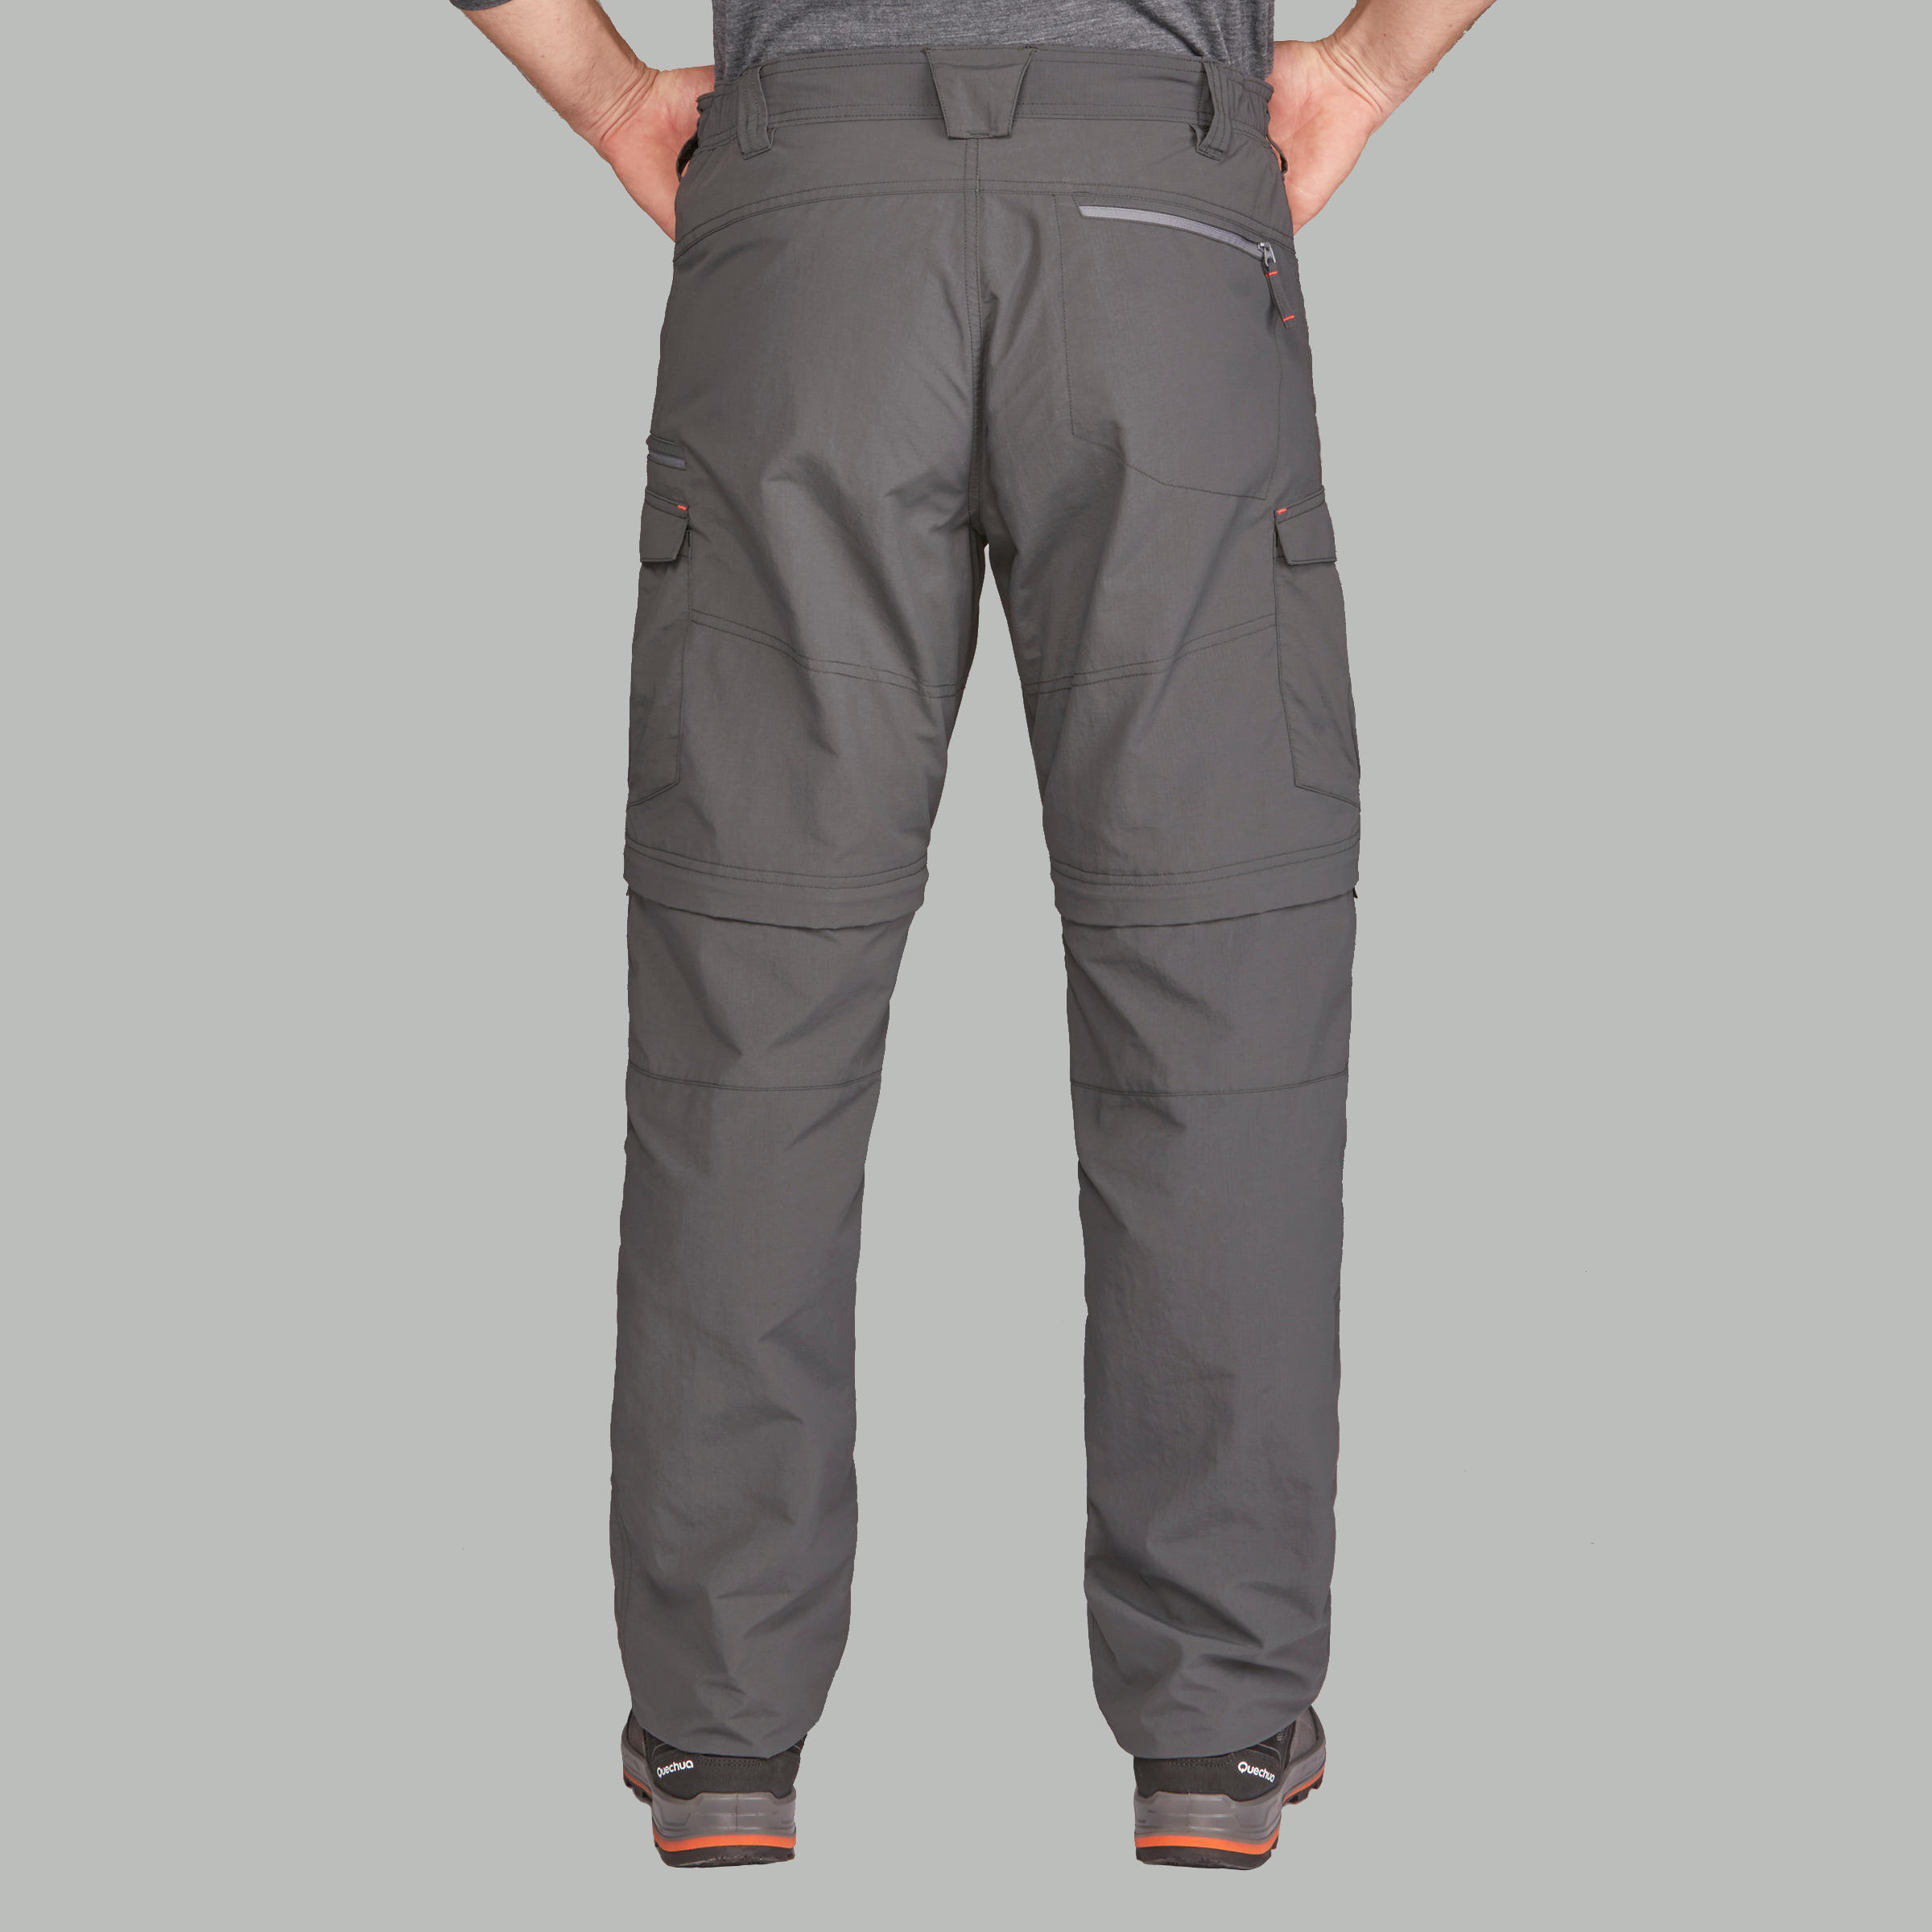 Six Pocket Cargo Pants Best Six Pocket Cargo Pants in India for Your  Outdoors and Indoors Style  The Economic Times